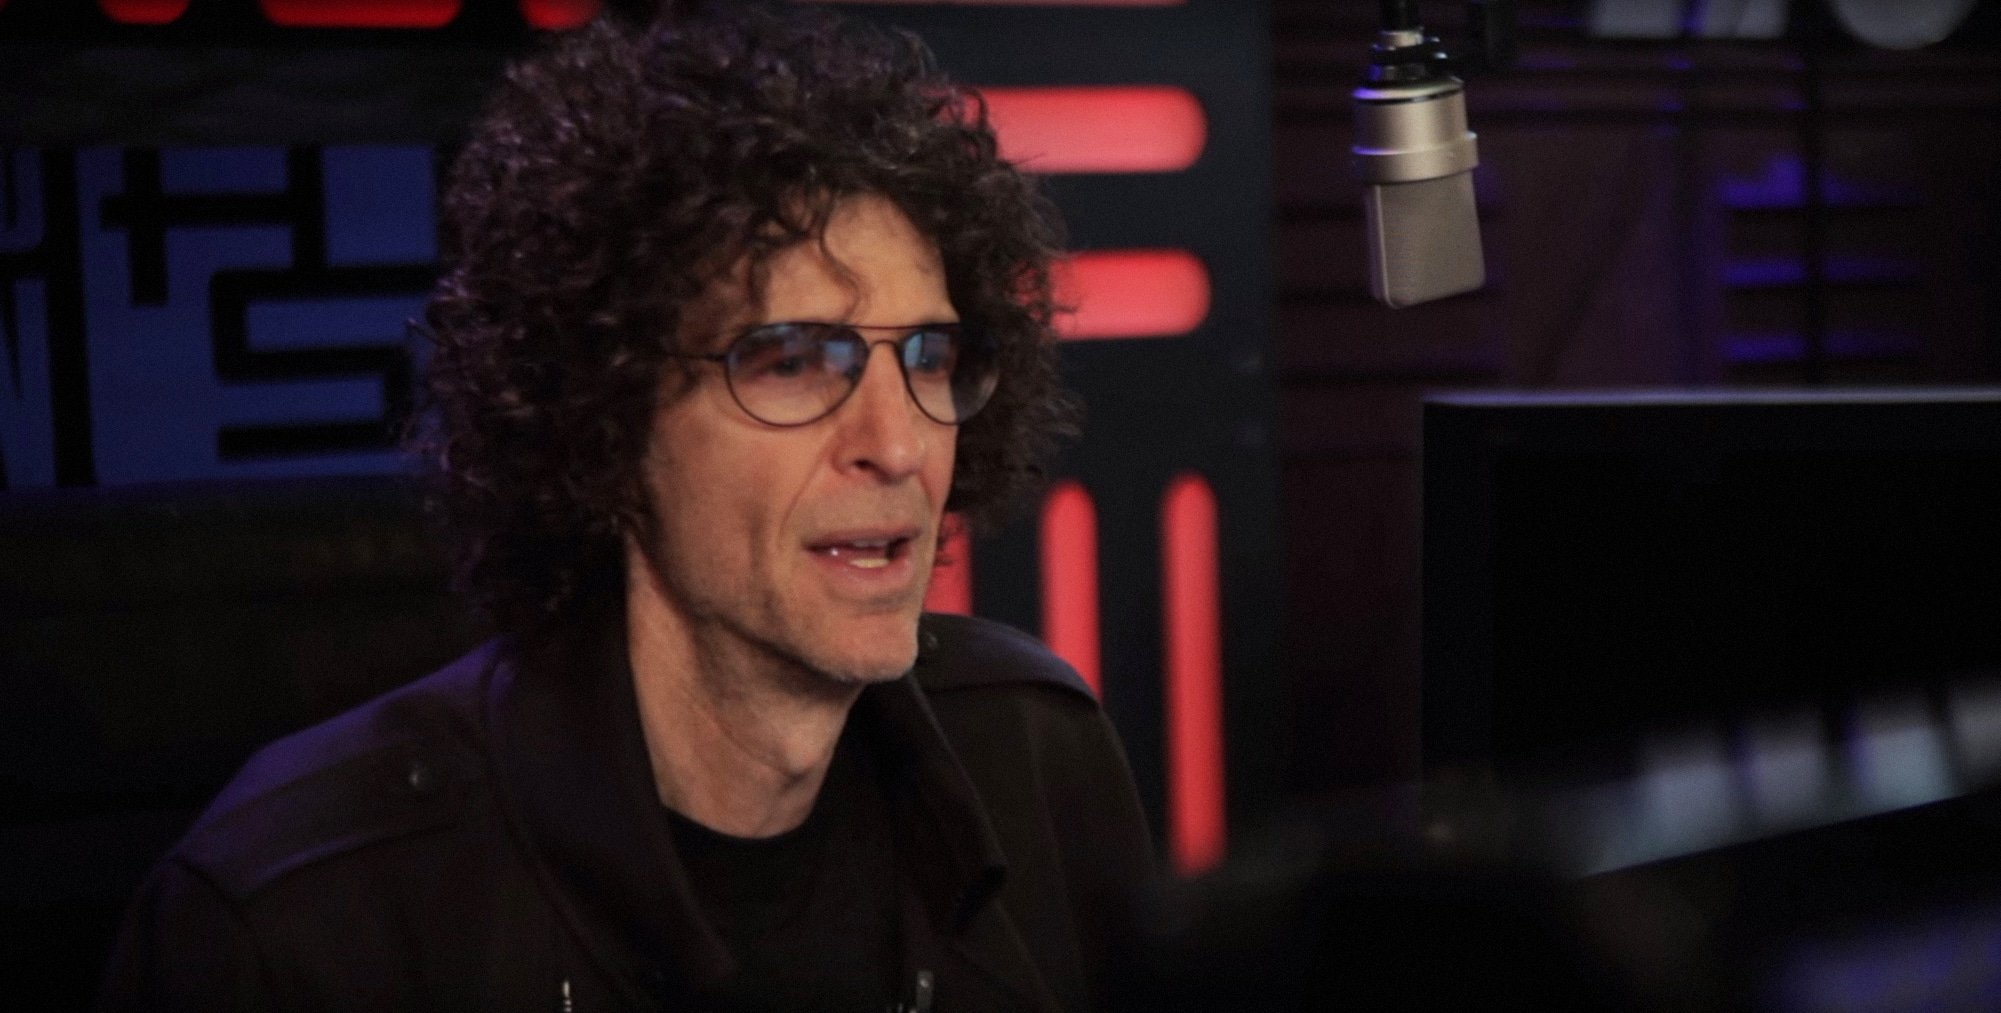 ALL THE RAGE (SAVED BY SARNO), Howard Stern, 2016